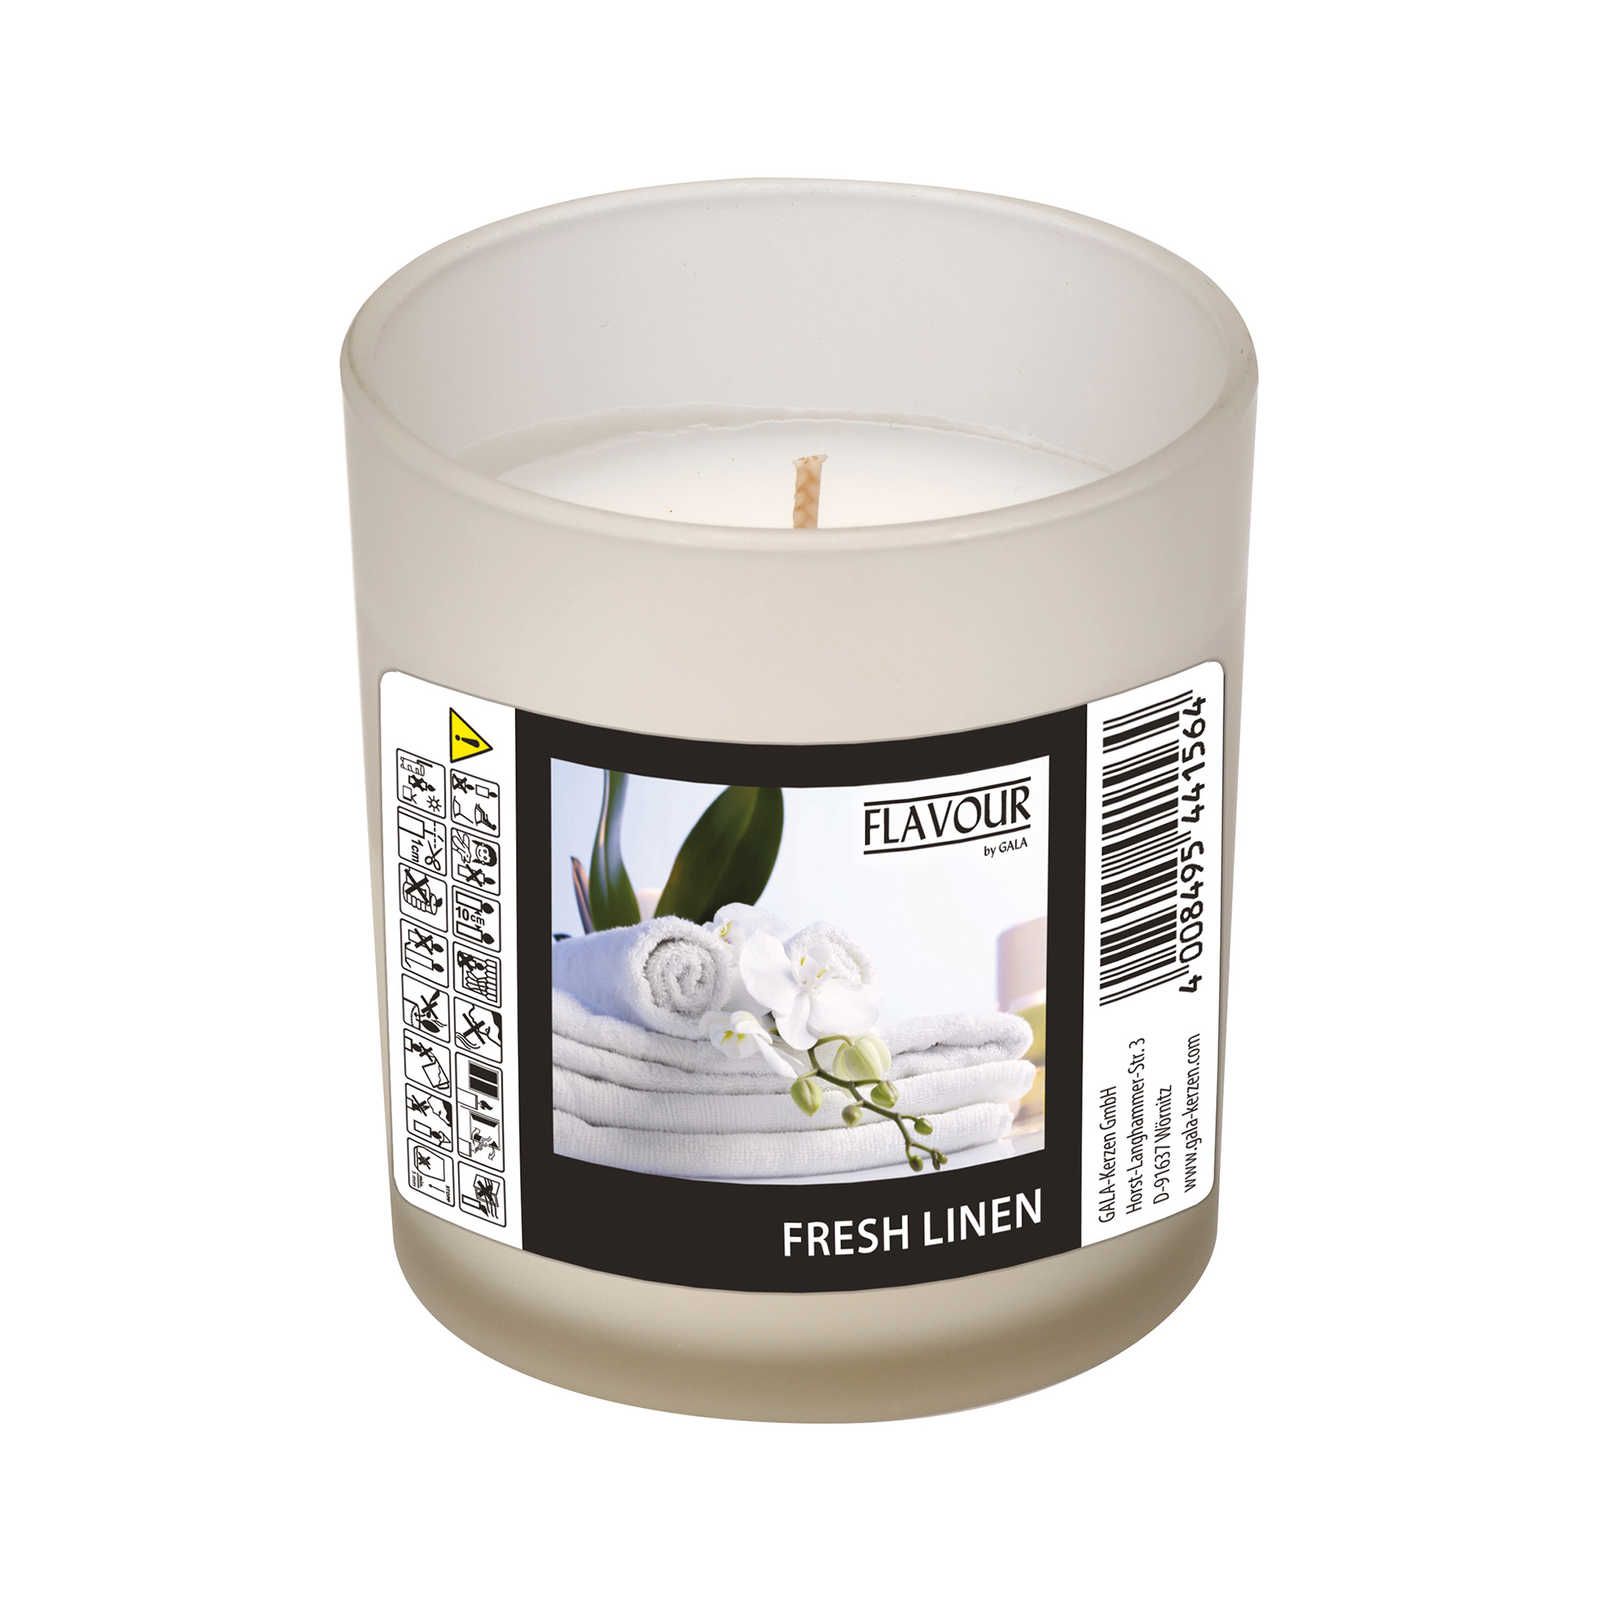             Fresh Linen scented candle with pleasant scent of freshly washed laundry - 110g
        